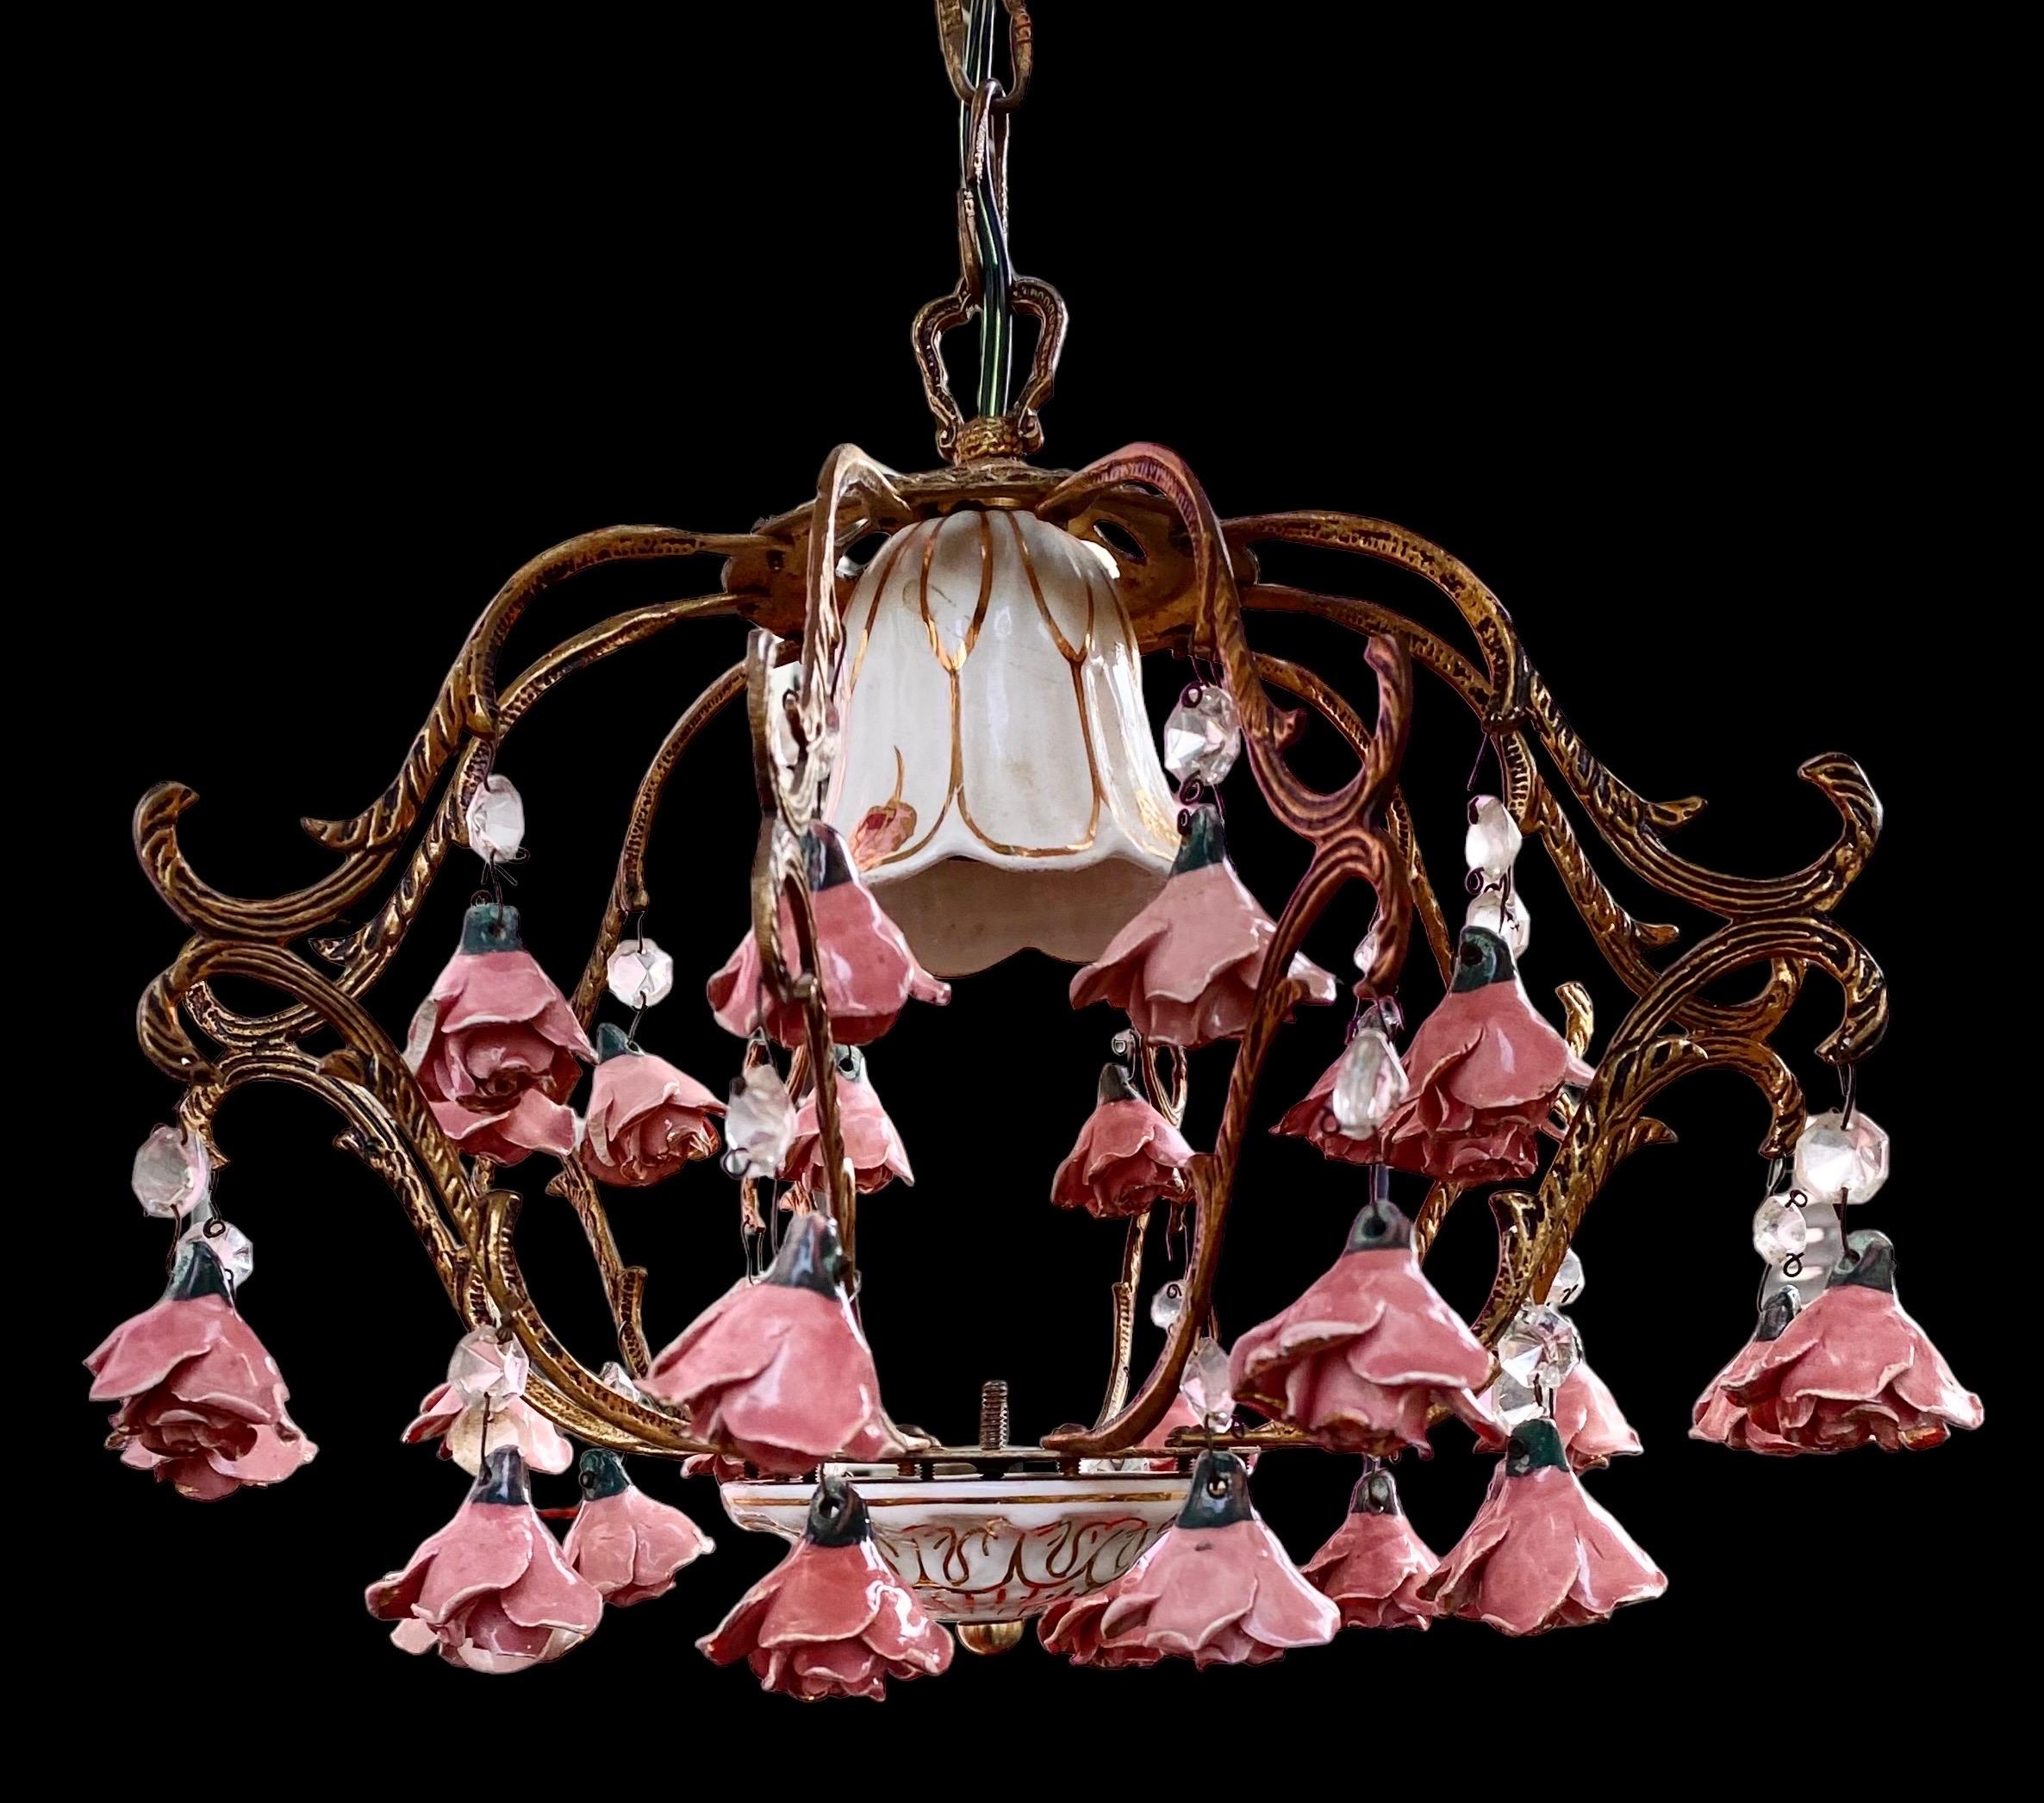 A vintage, charming French hanging chandelier, in brass with ceramic handmade flower décor.
Unusually complete and in good condition. 
Makers mark / hallmarks: none
Sourced: in Normandy, France 
Origin: French 
Age: circa 1960s-1970s

Would